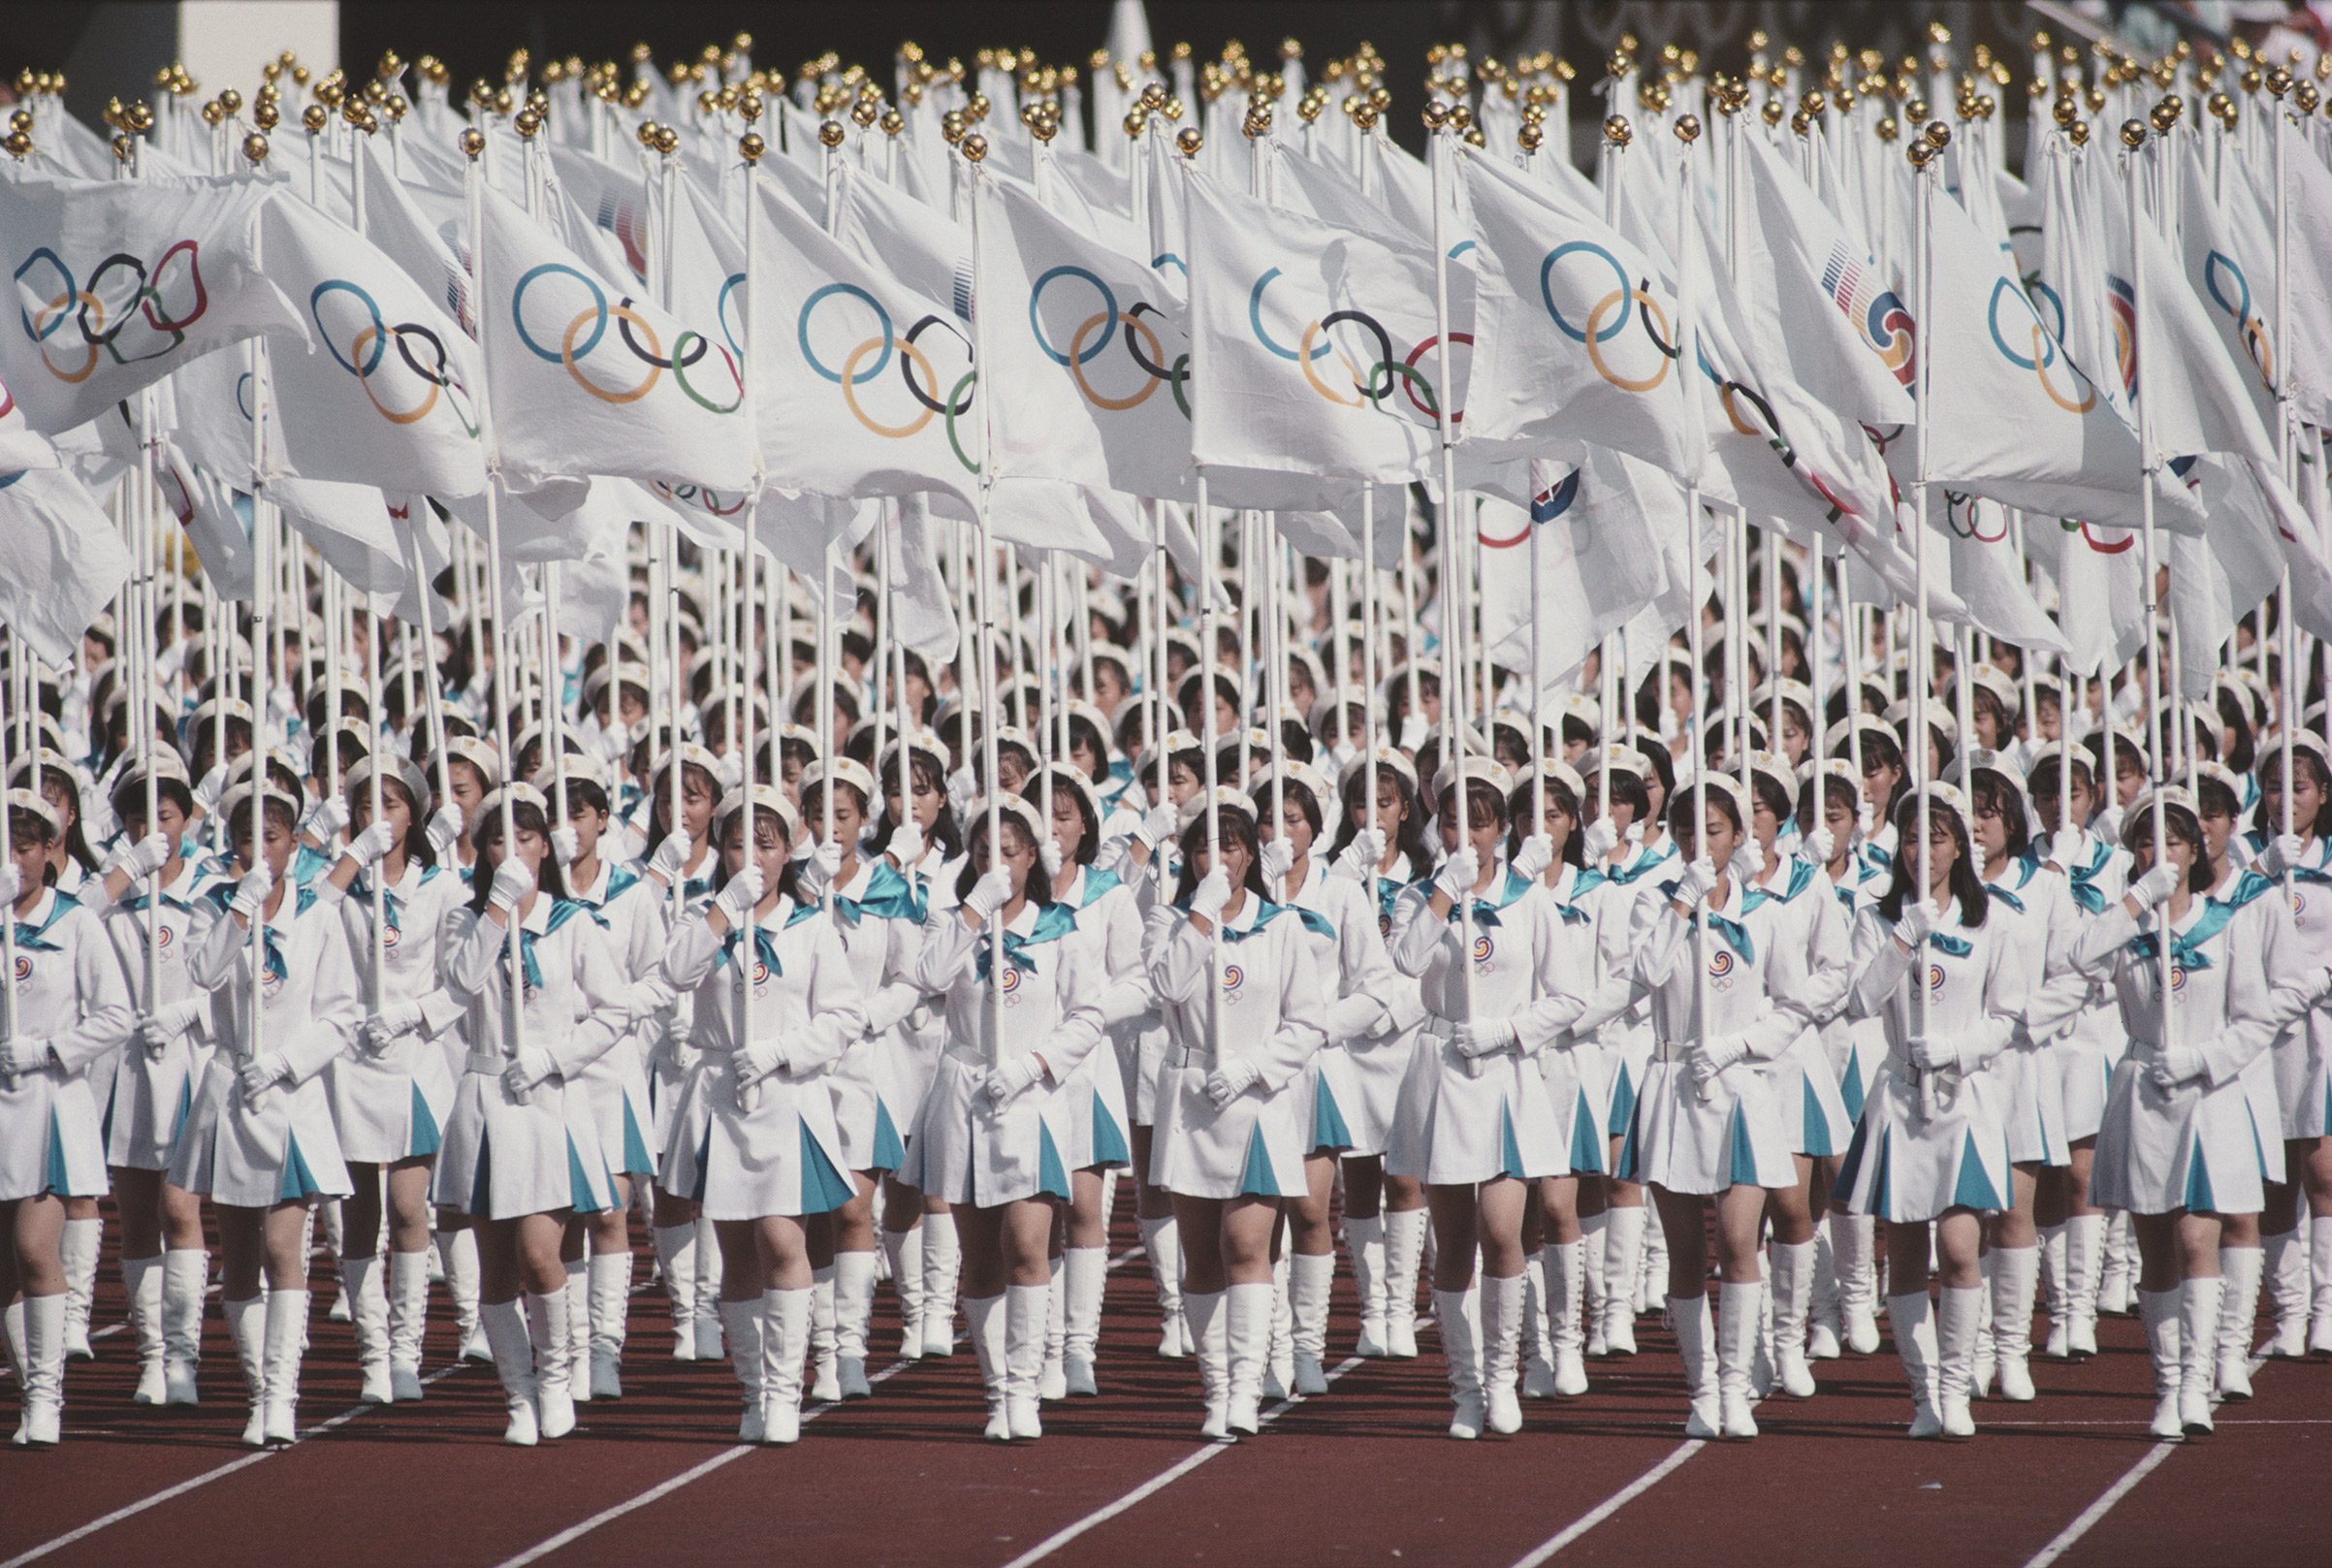 The Olympic Flag is presented in the Olympic Stadium during the Opening Ceremony of the XXIV Summer Olympic Games on Sep. 17, 1988, at the Seoul Olympic Stadium in Seoul, South Korea. (Gray Mortimore—Getty Images)